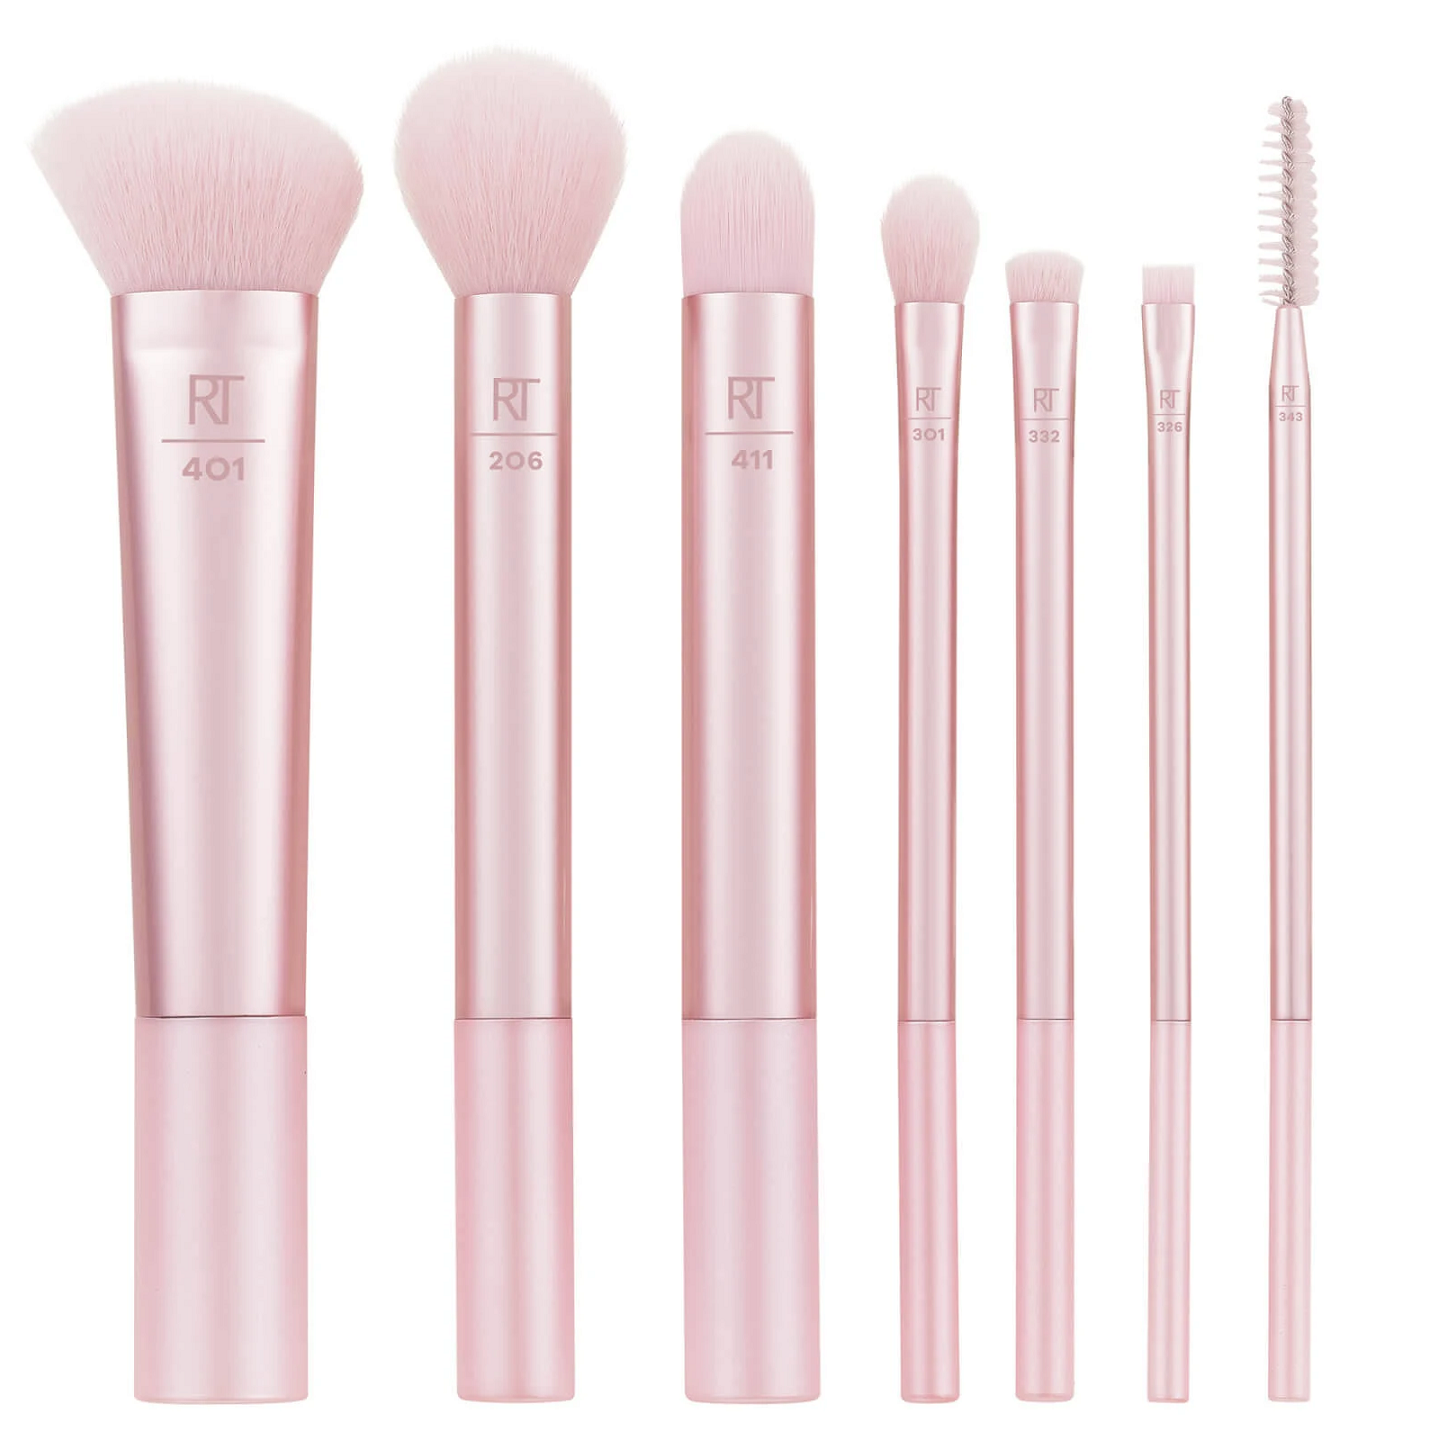 Real Techniques Light Up The Night Brush Set